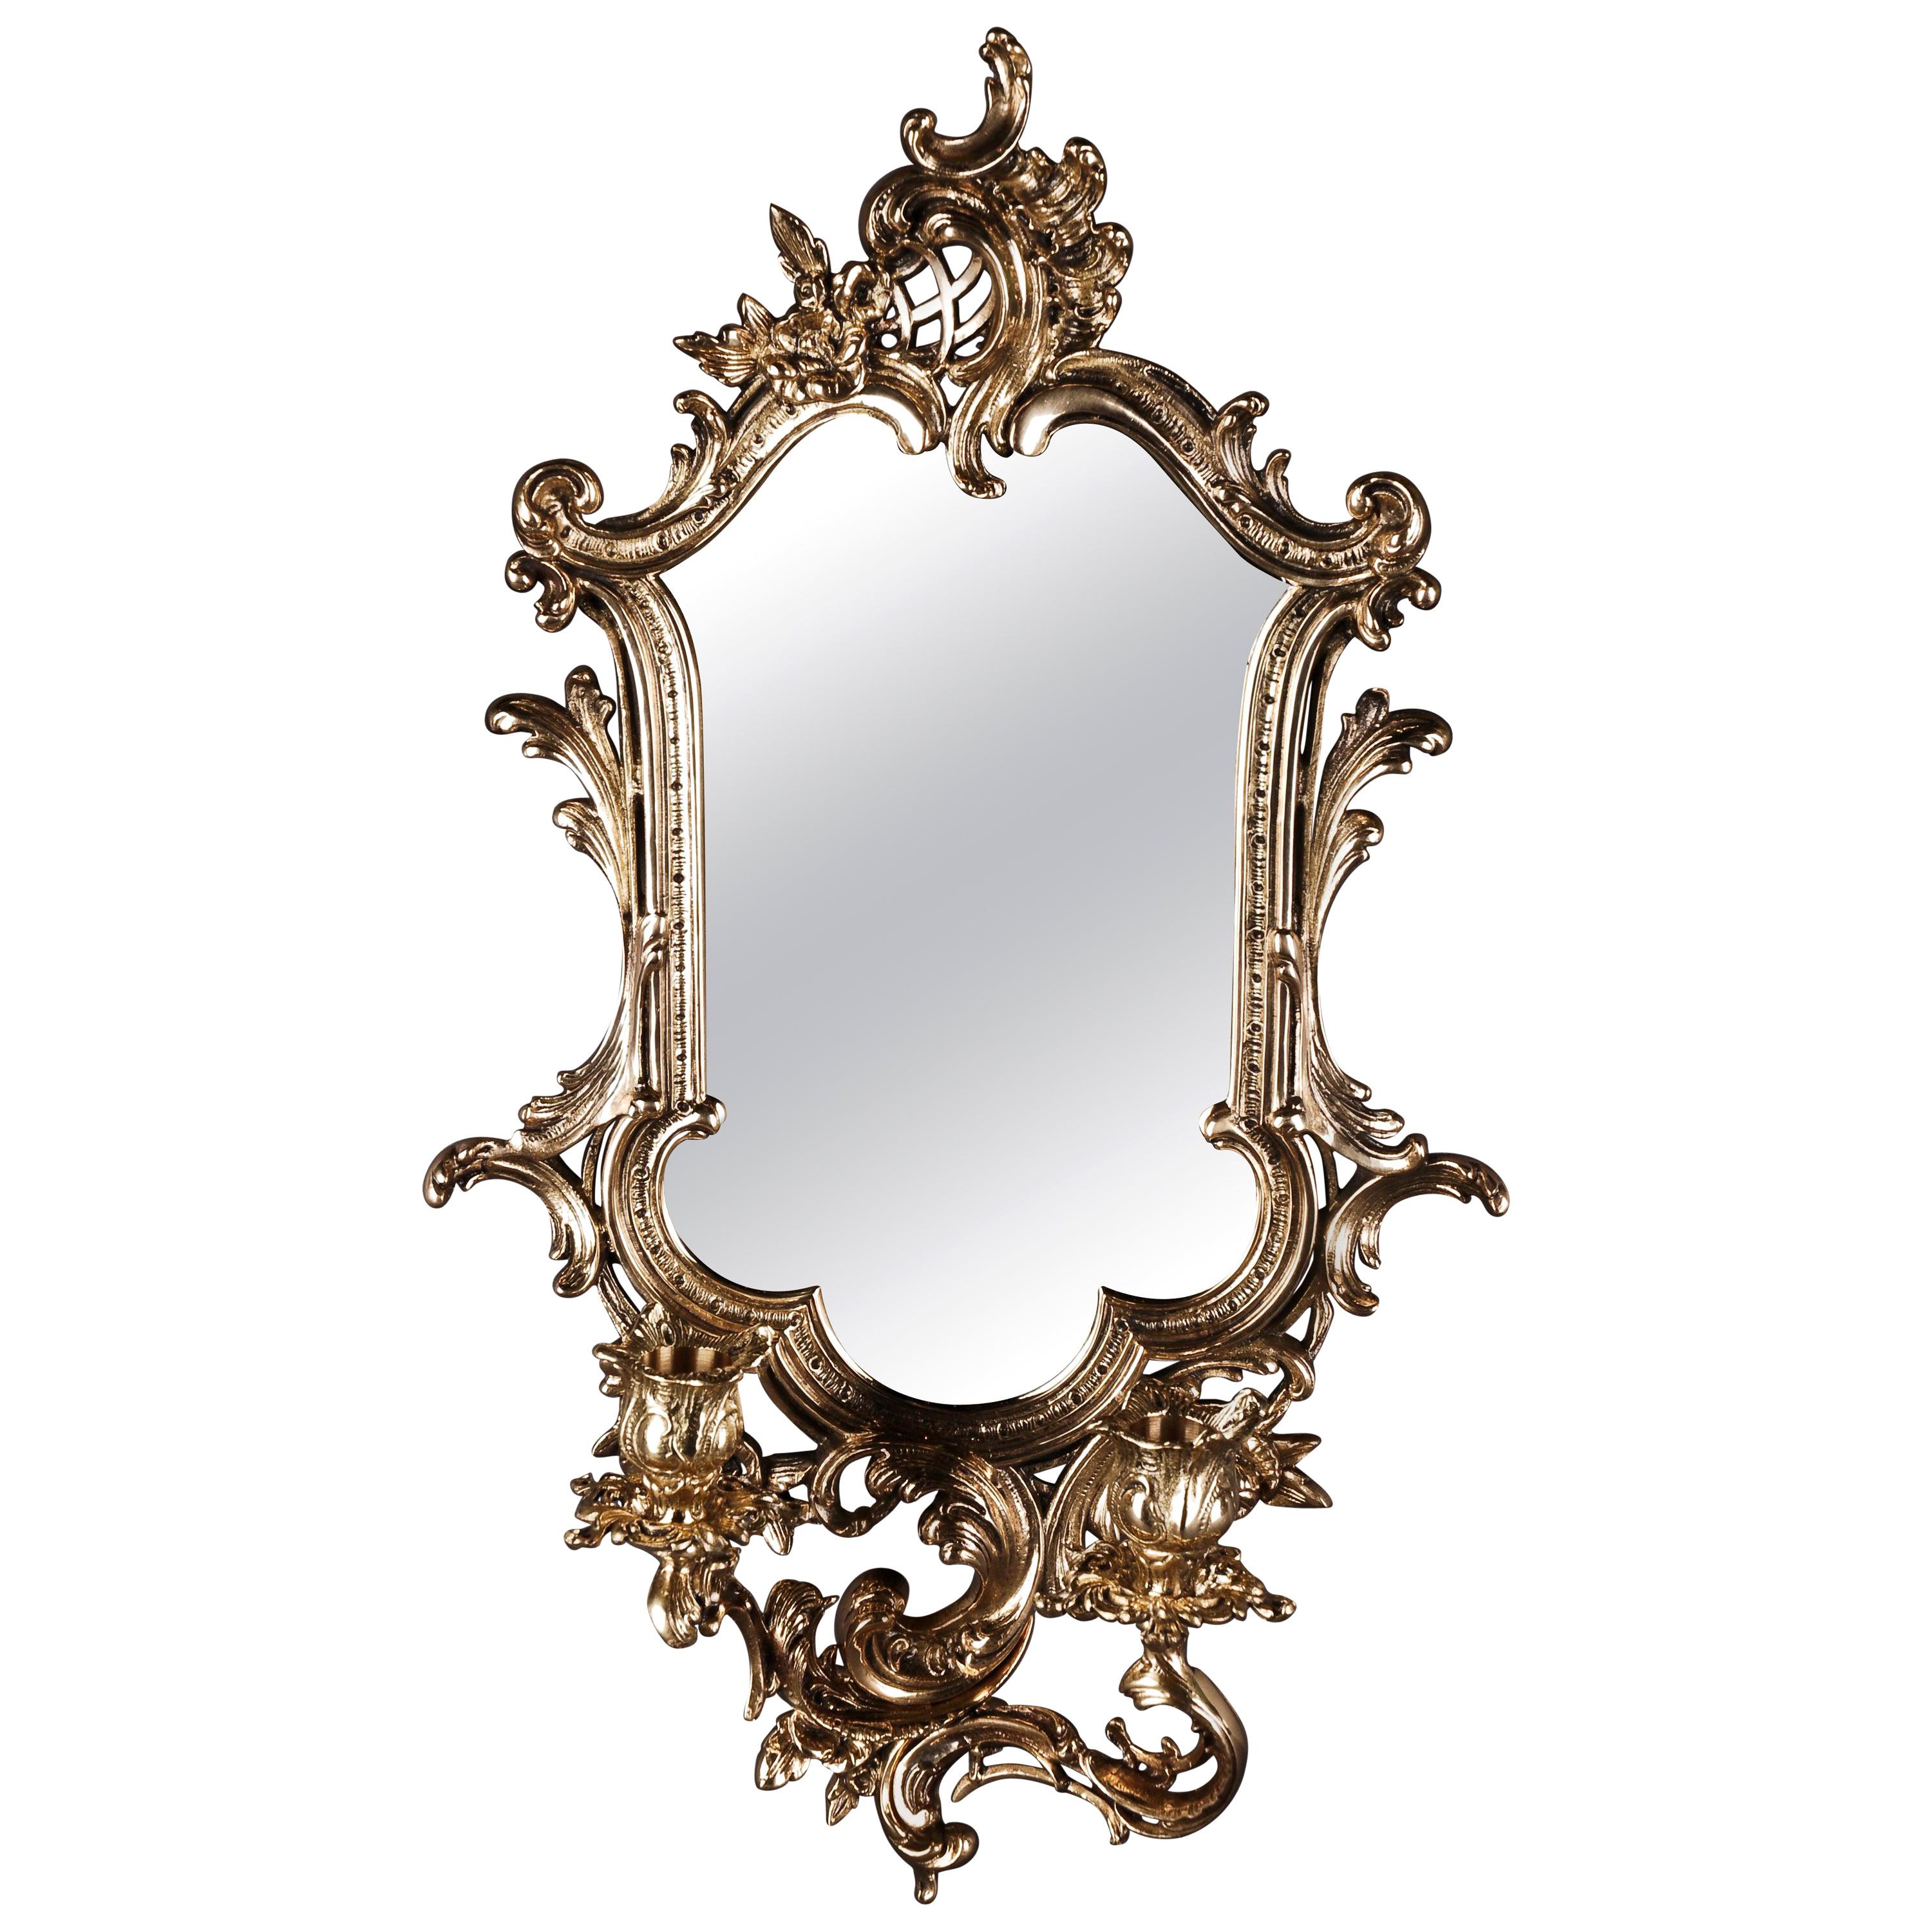 20th Century Rococo Style Wall Mirror with Candleholders